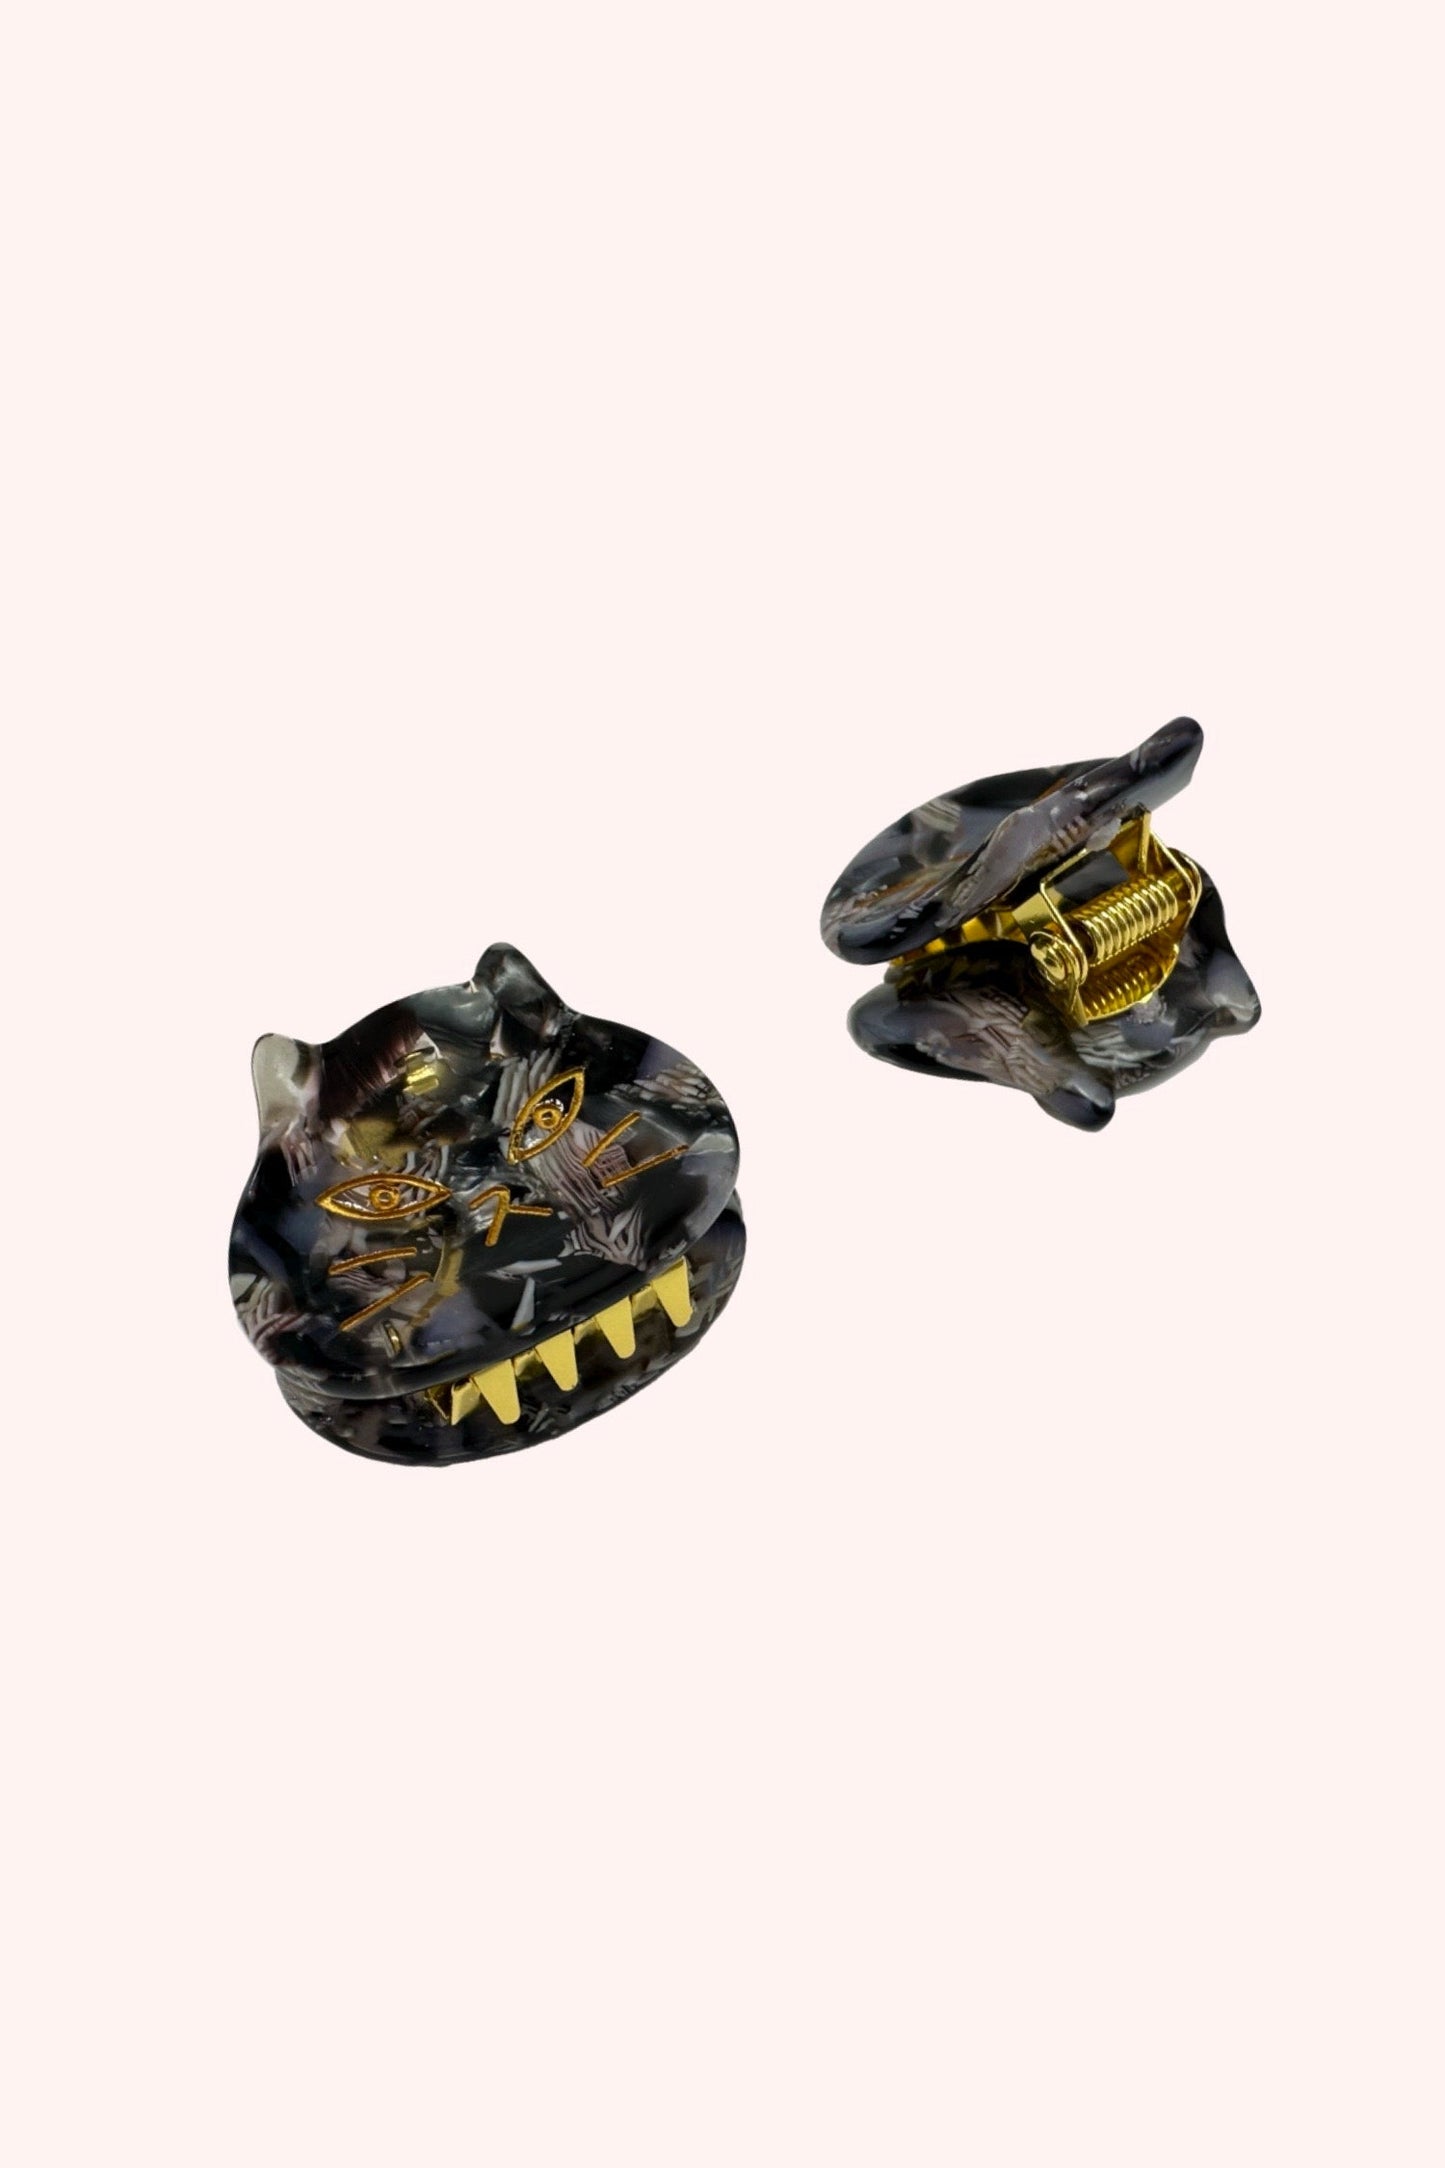 the Cat's Meow Jaw Clip Pair, Black, cat head on a golden jaw clip to add some fun to your hairstyle